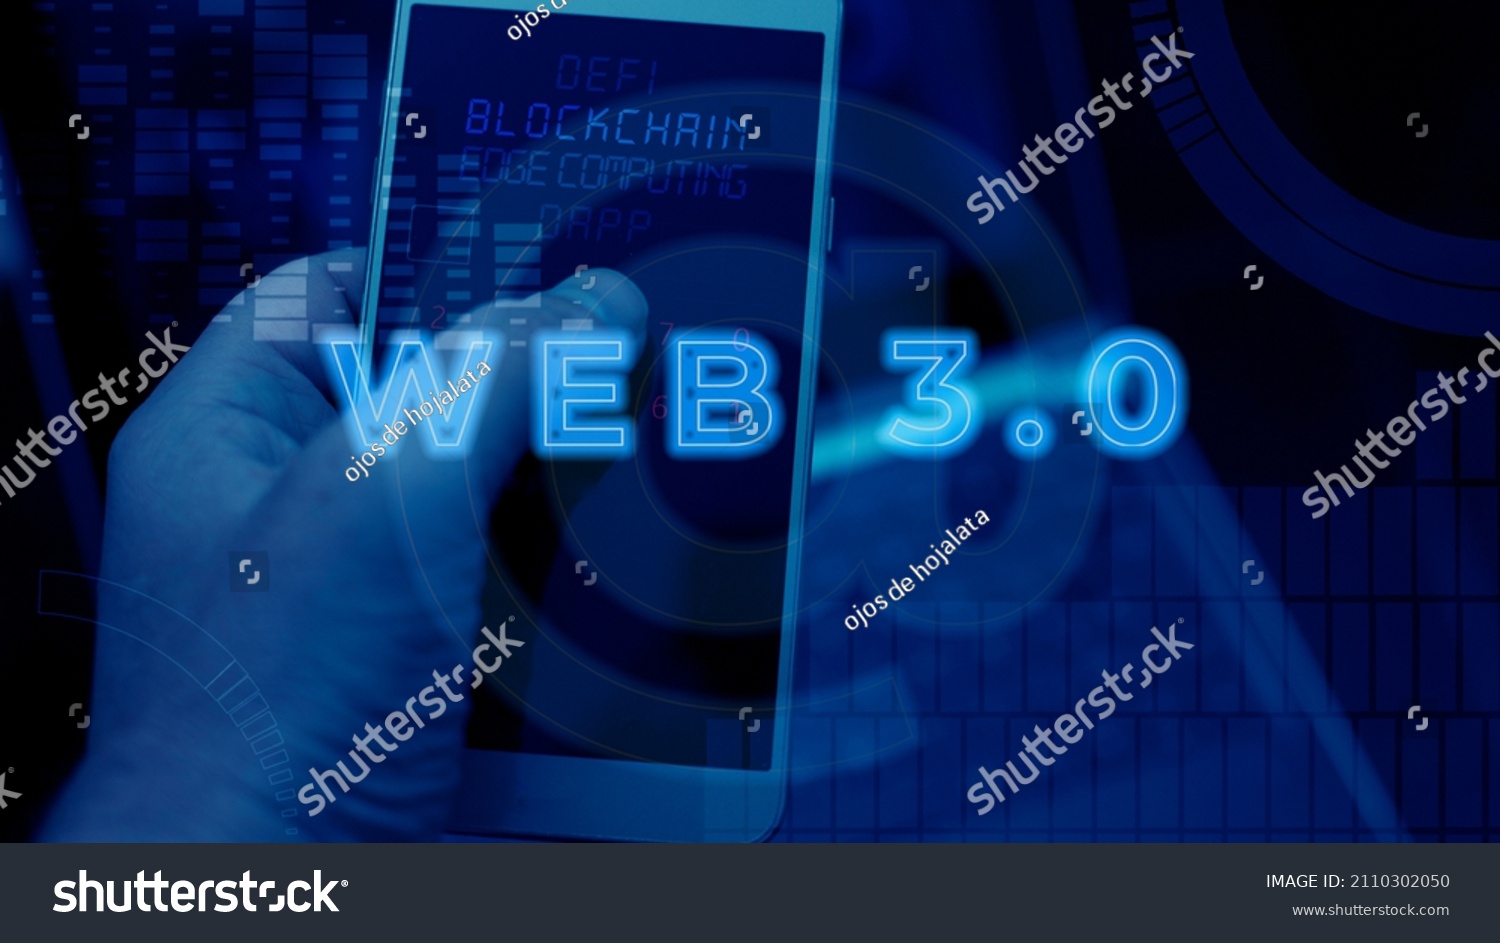 Web 3.0 Typography. Design with "Web 3.0" text projected onto the background. Virtual communication concept representing the future of the Internet in web 3. Blockchain, Dao, Edge computing, meta. #2110302050